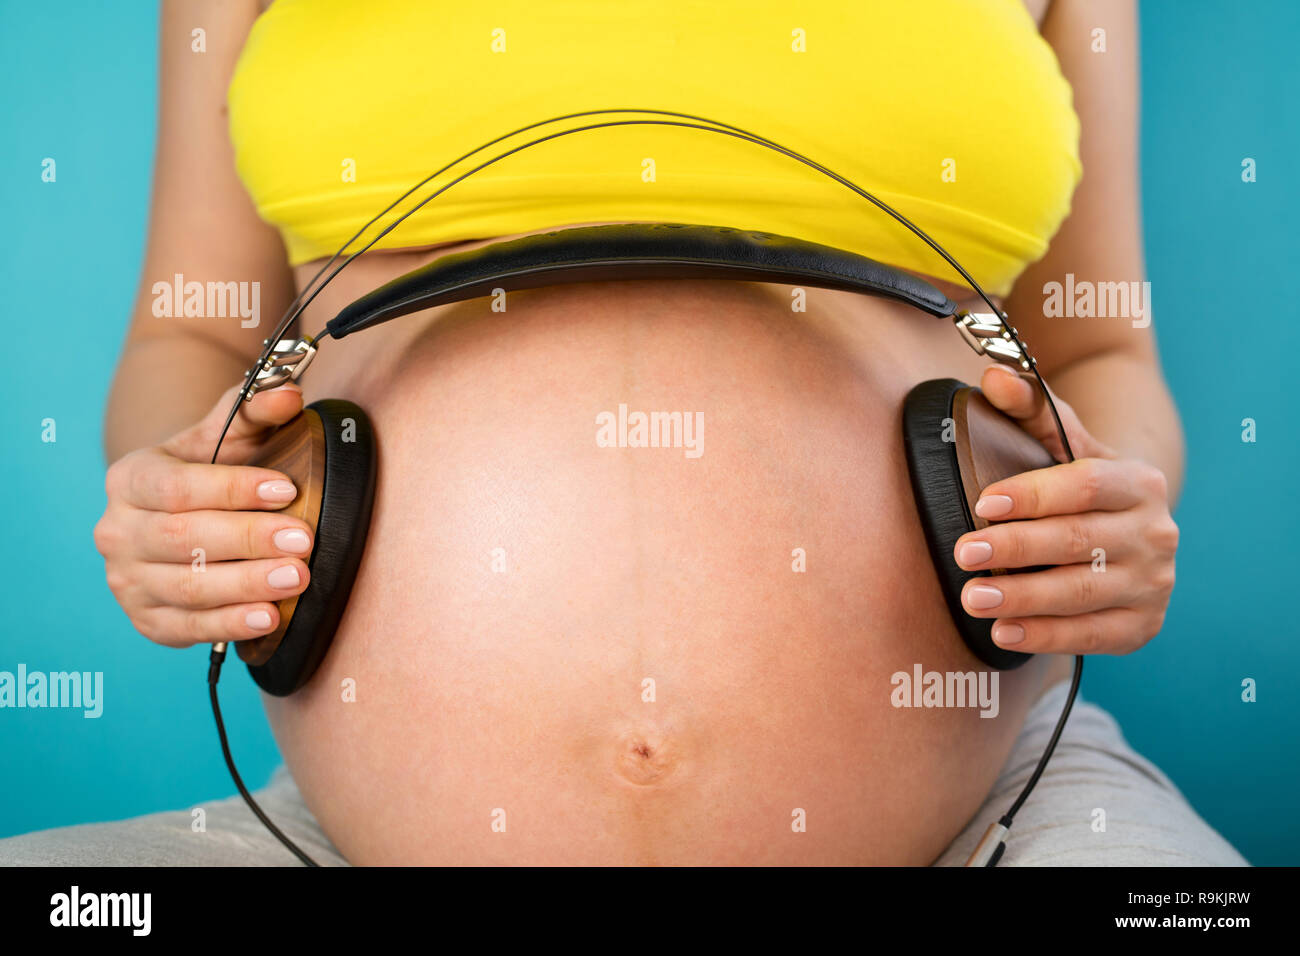 Pregnant Woman Holding Headphones On Her Belly Music For Baby Concept Pregnancy  And Music Stock Photo - Download Image Now - iStock